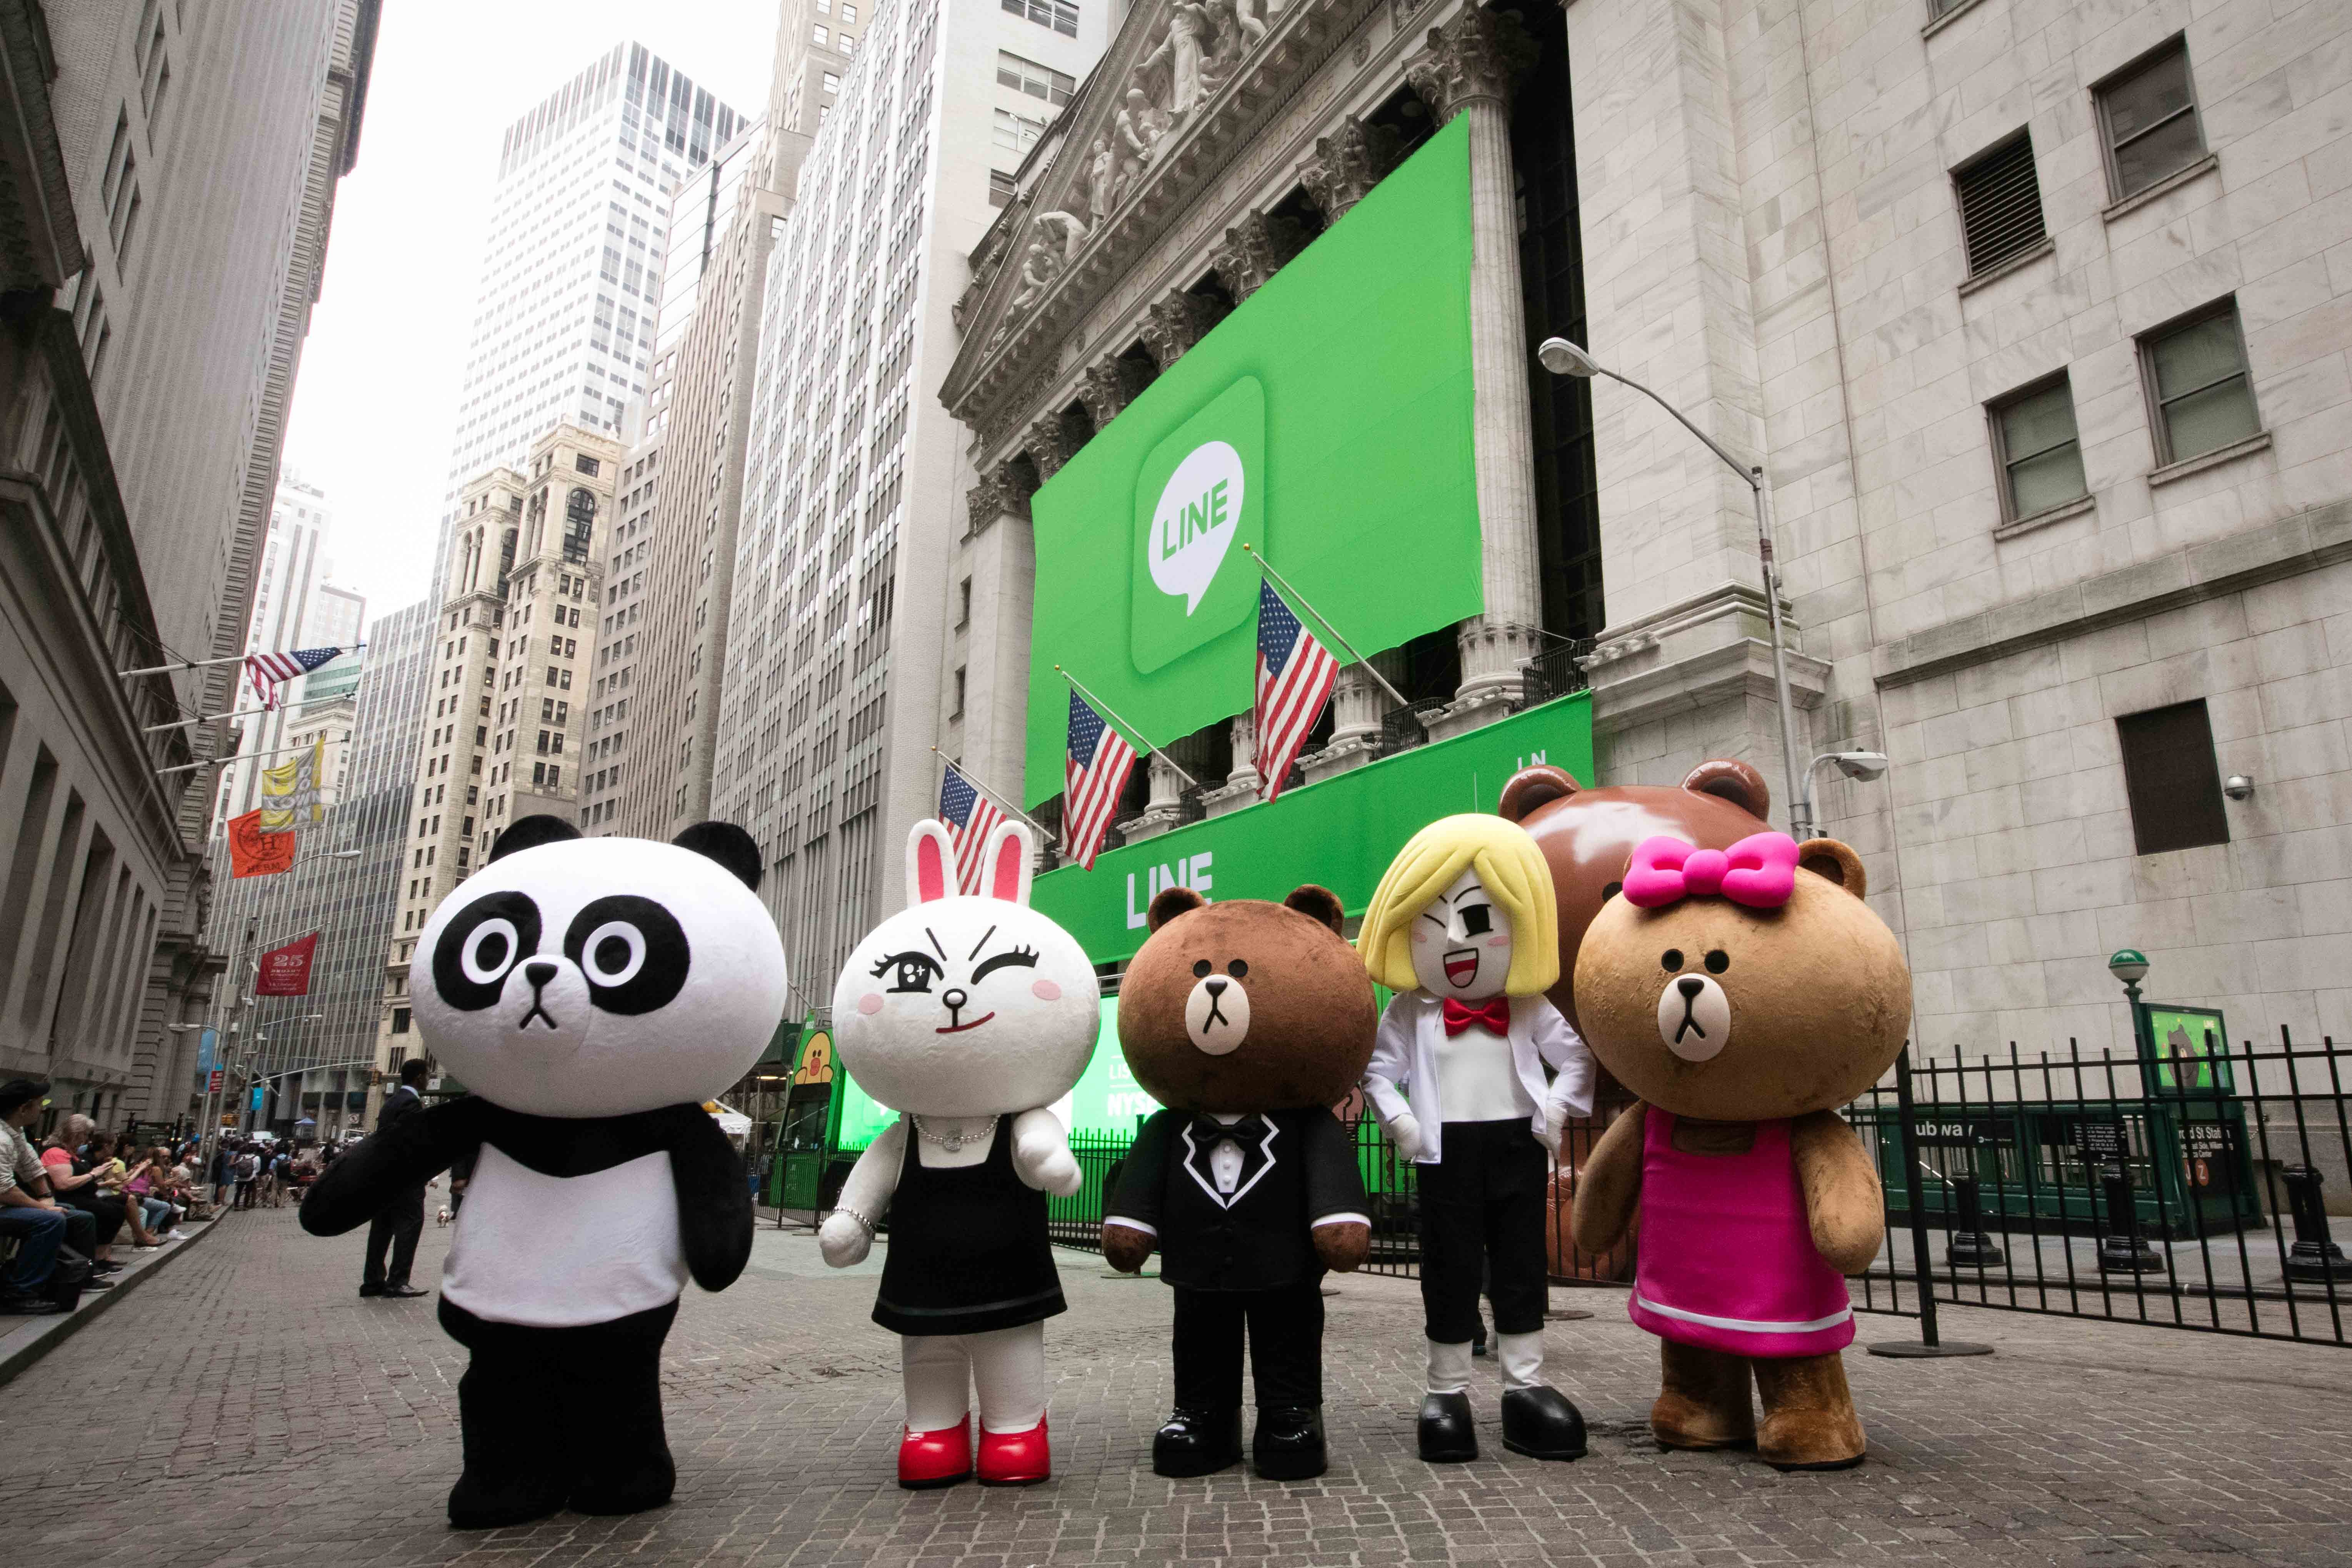 Chat app Line is reportedly considering its own cryptocurrency